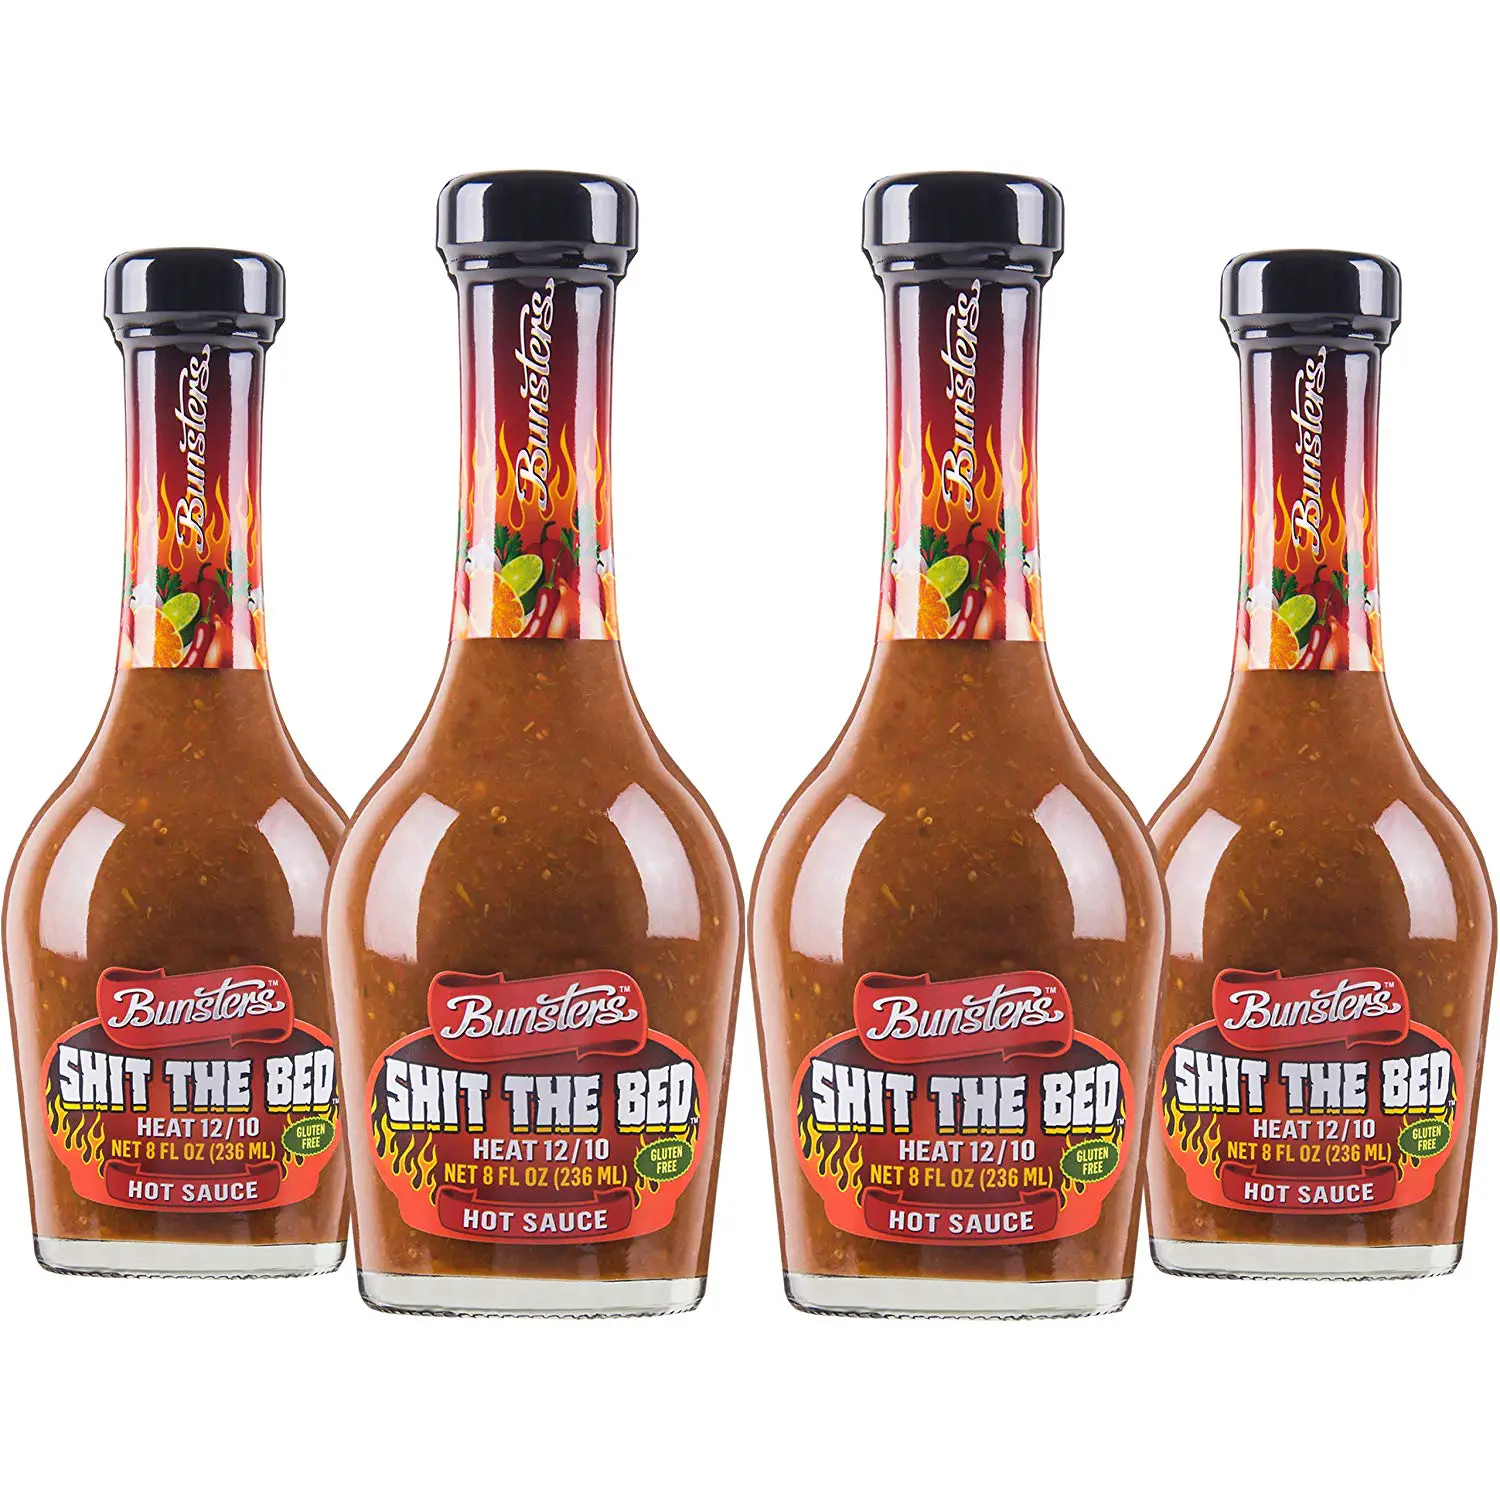 4 x Shit The Bed Hot Sauce (12/10 Heat) â Bunsters